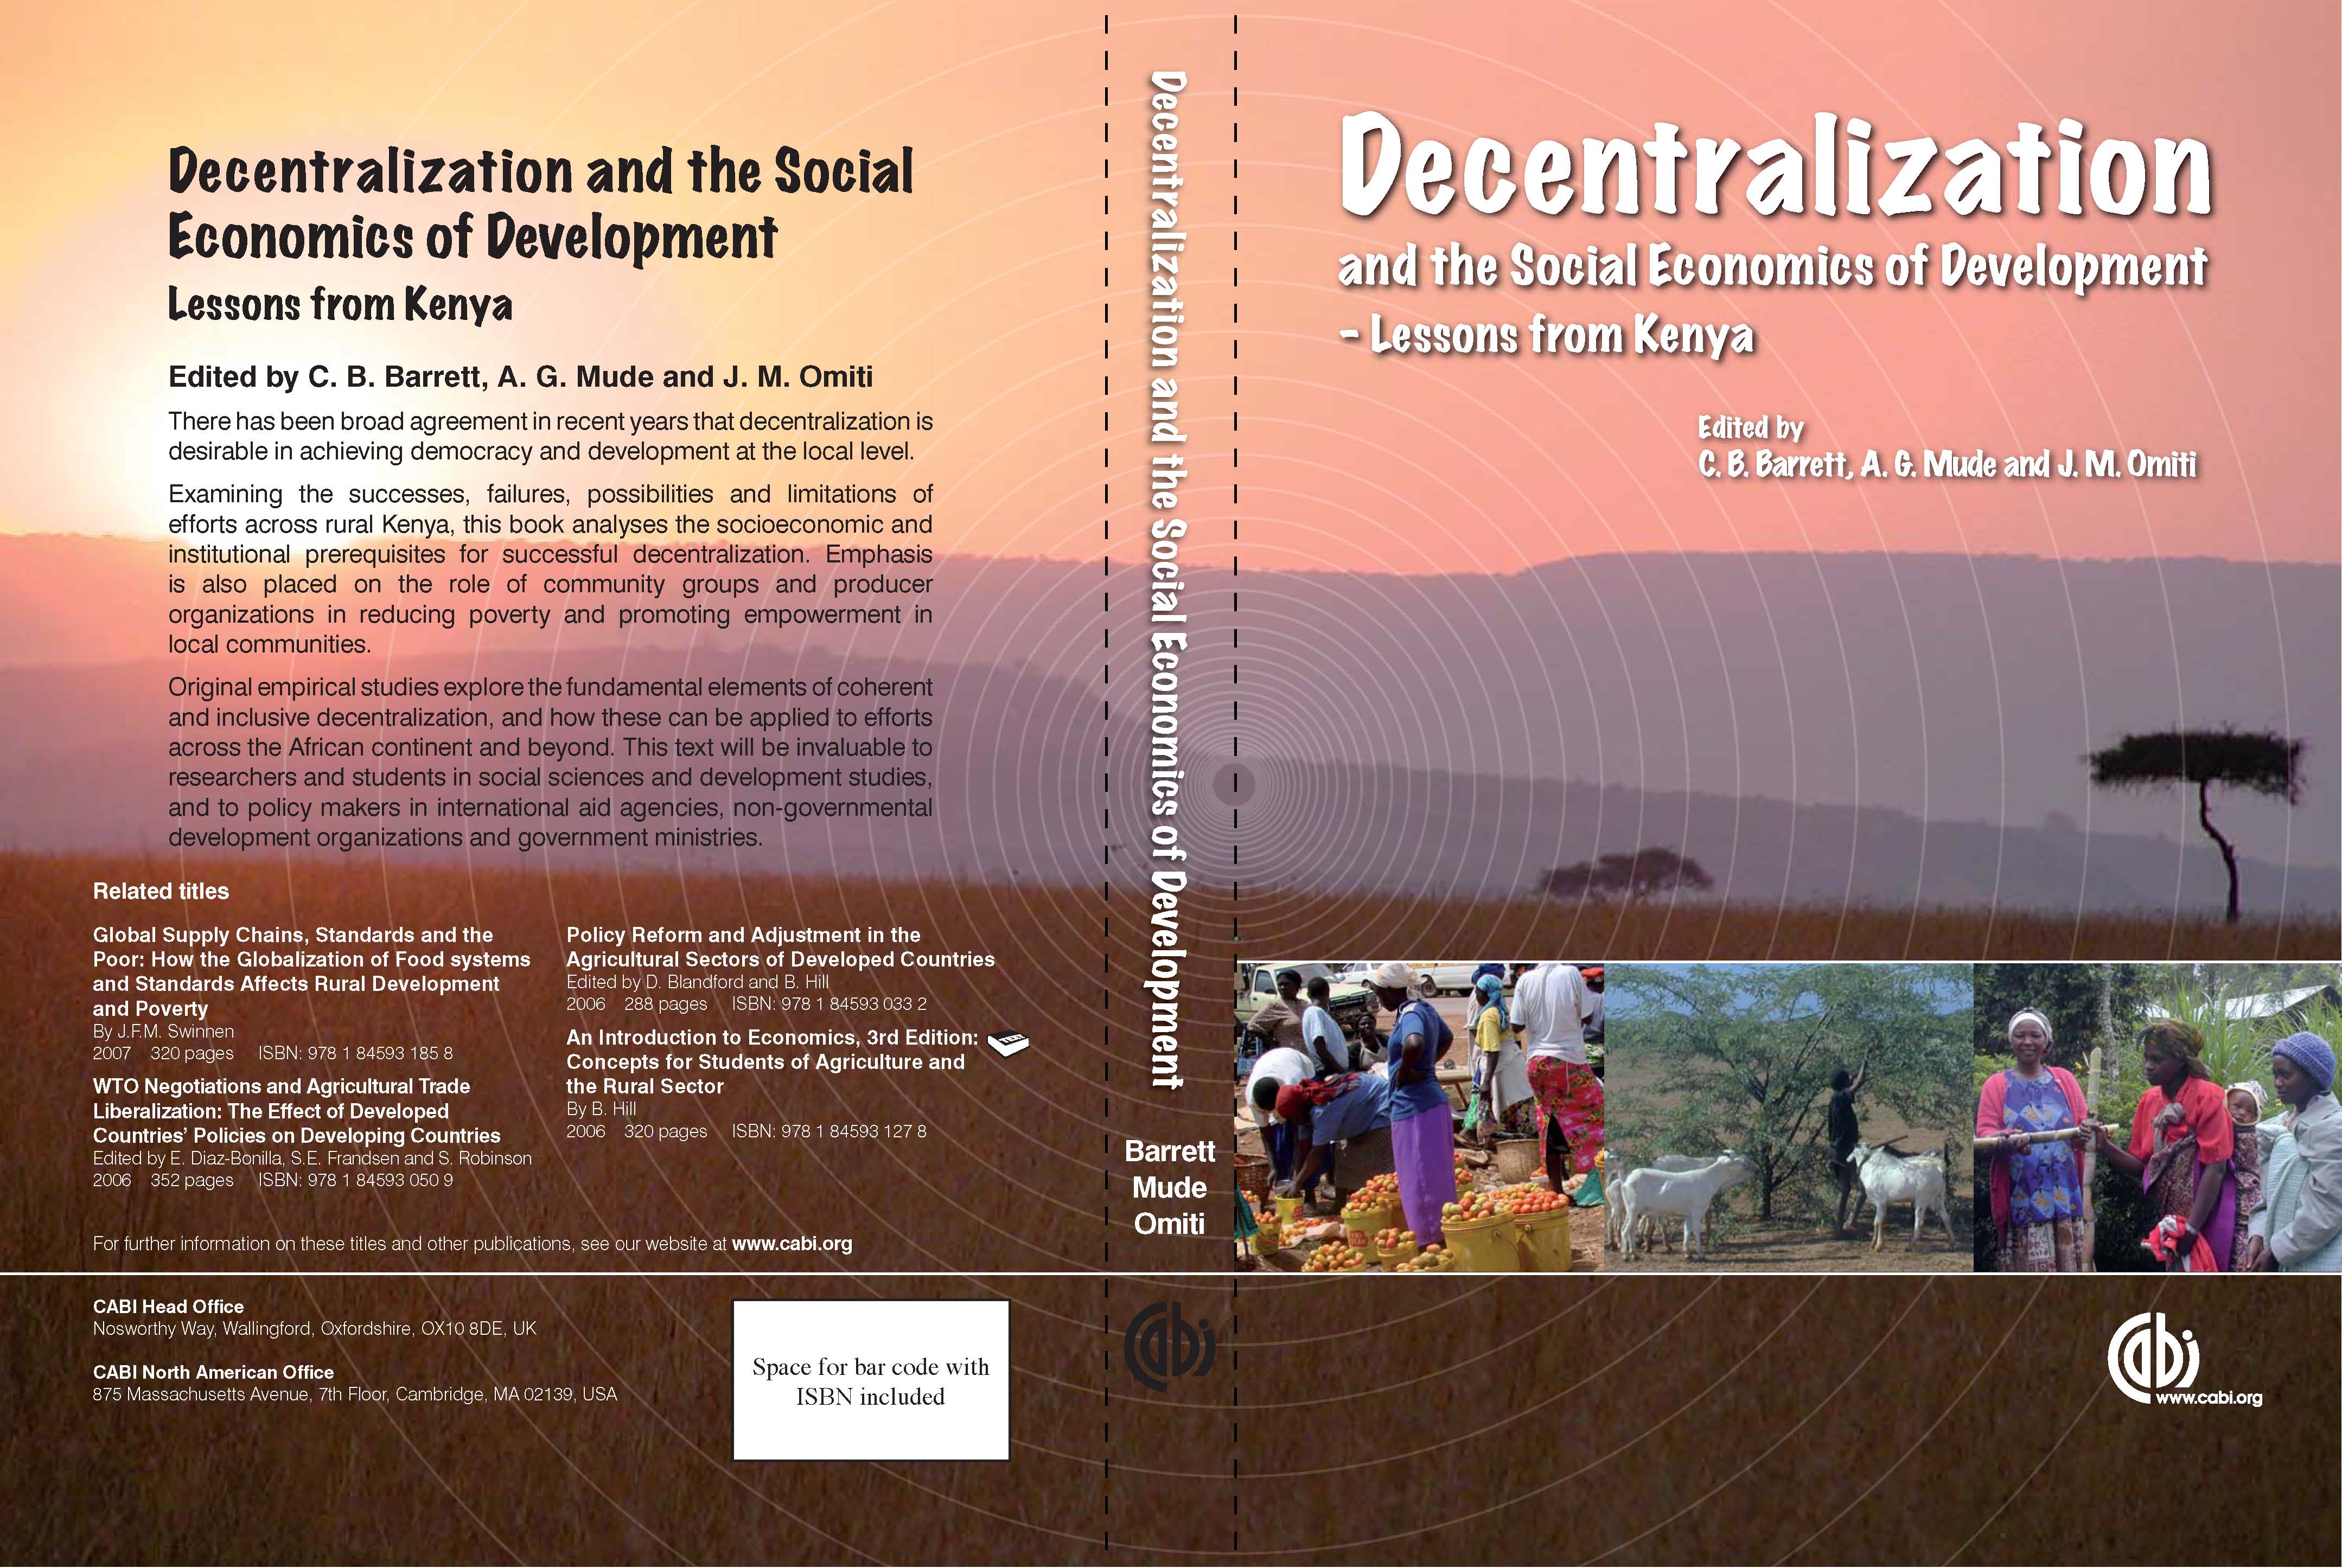 Decentralization and the Social Economics of Development-Lessons from Kenya